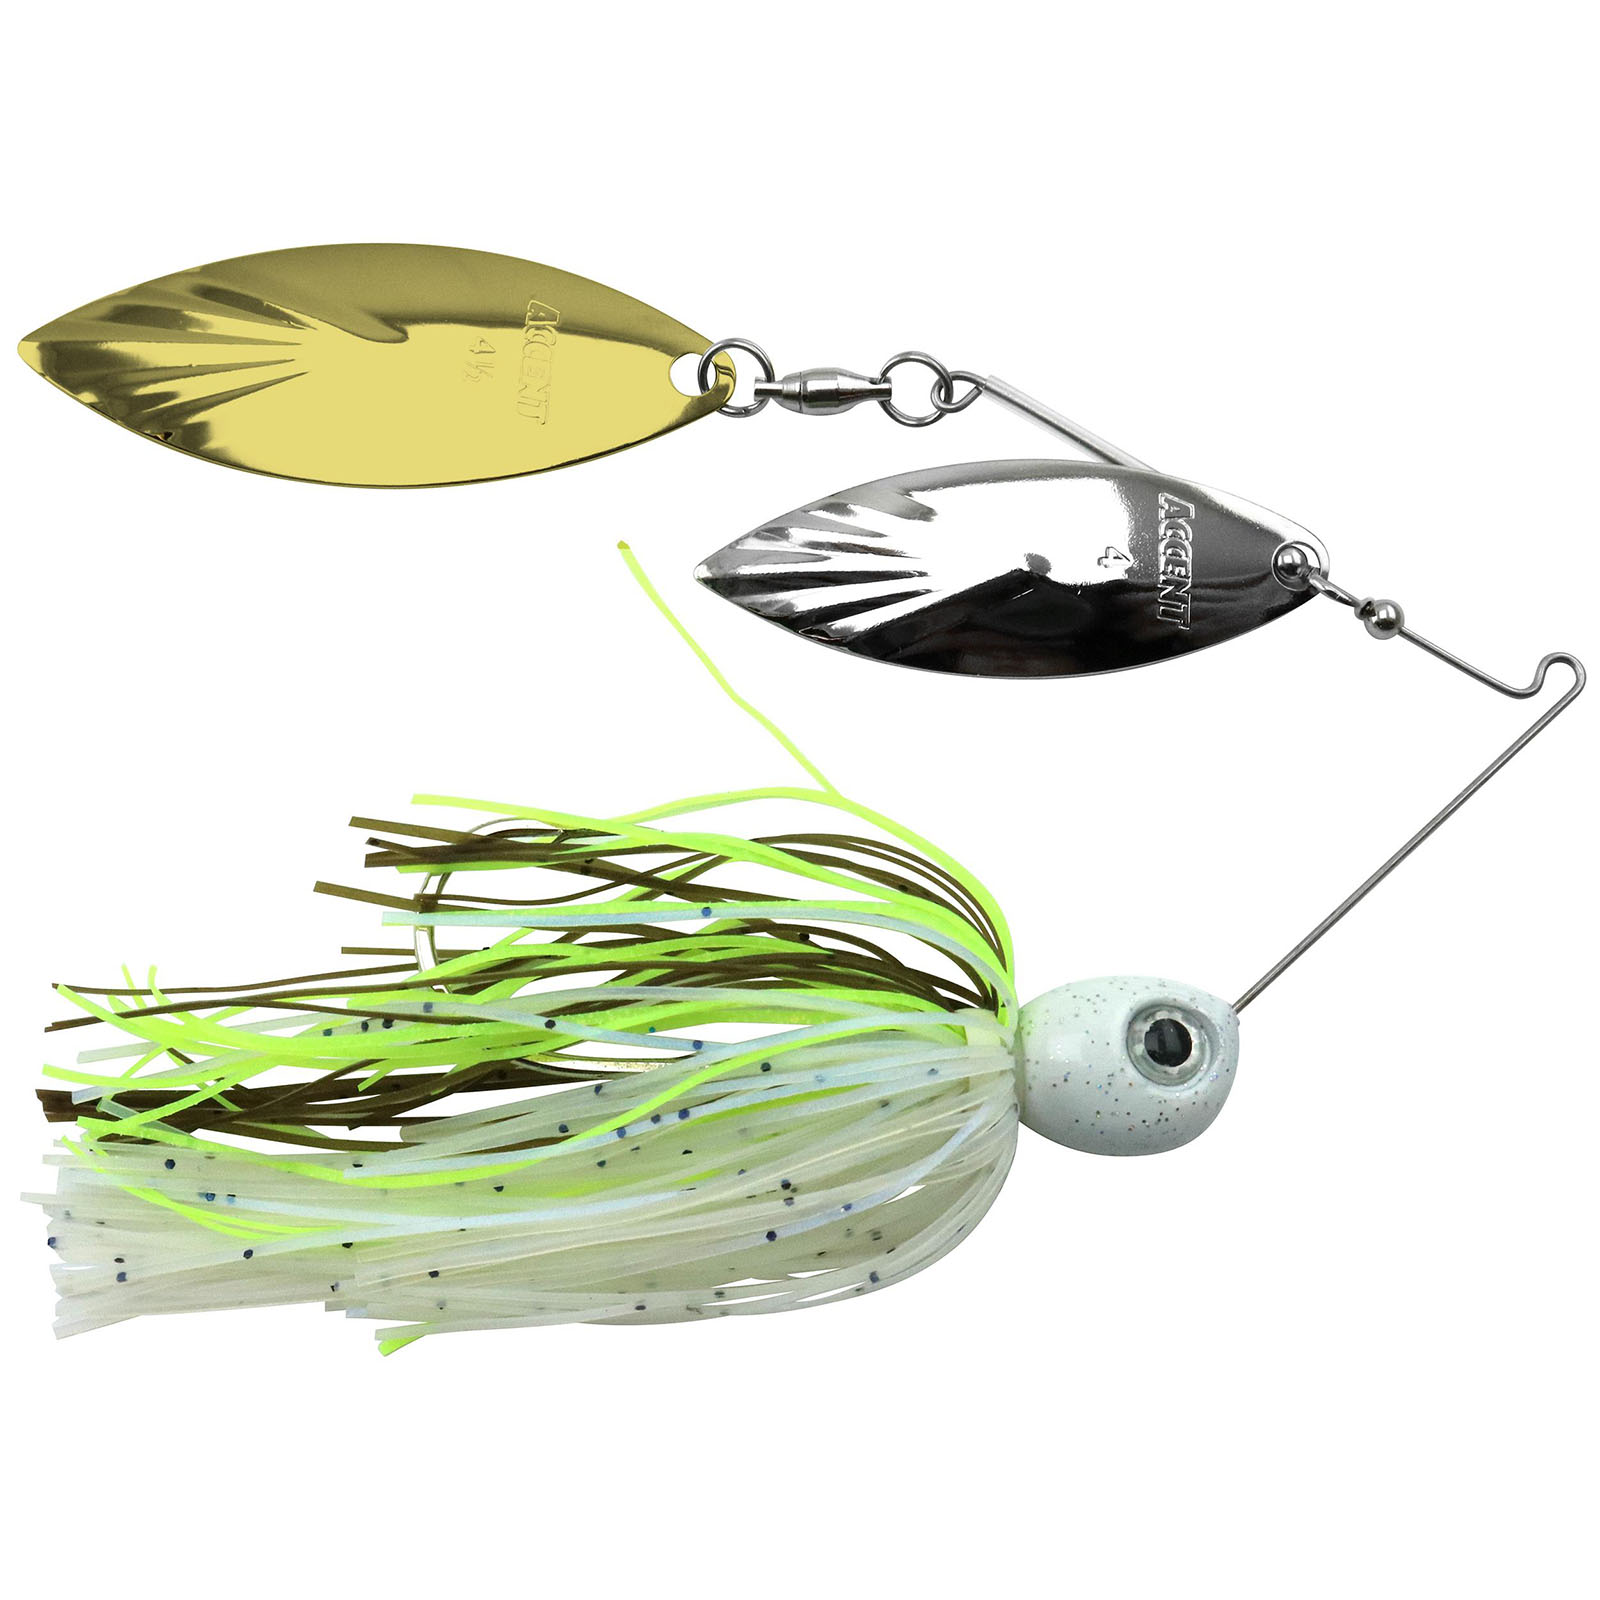 Accent River Special Double Willow Spinnerbait Nickel/Gold Blades - Threadfin Shad Skirt; 1/2 oz.